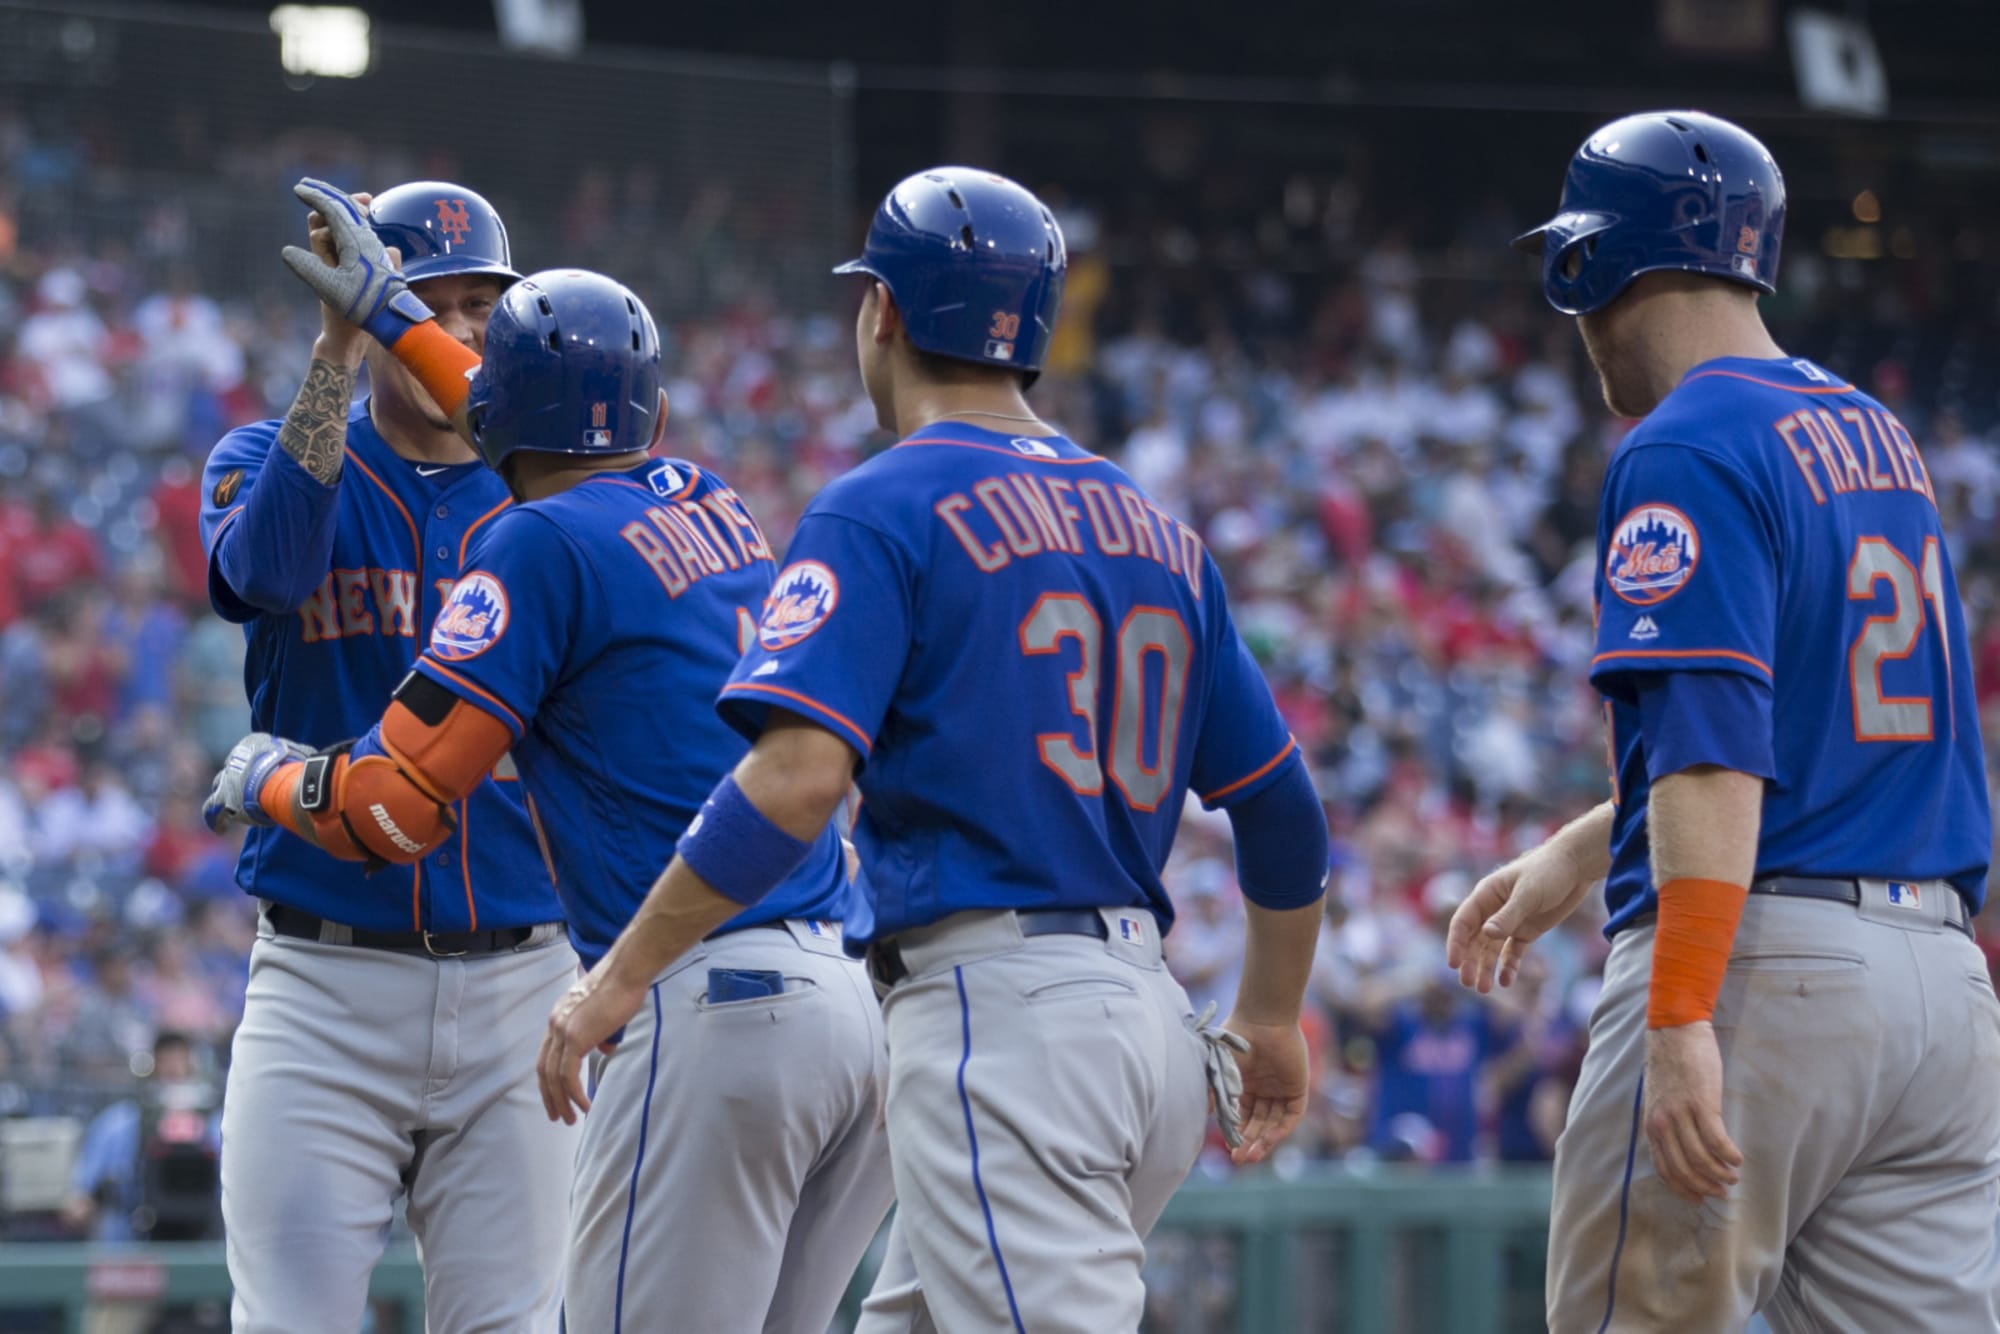 New York Mets: How the Mets are becoming a competent baseball team